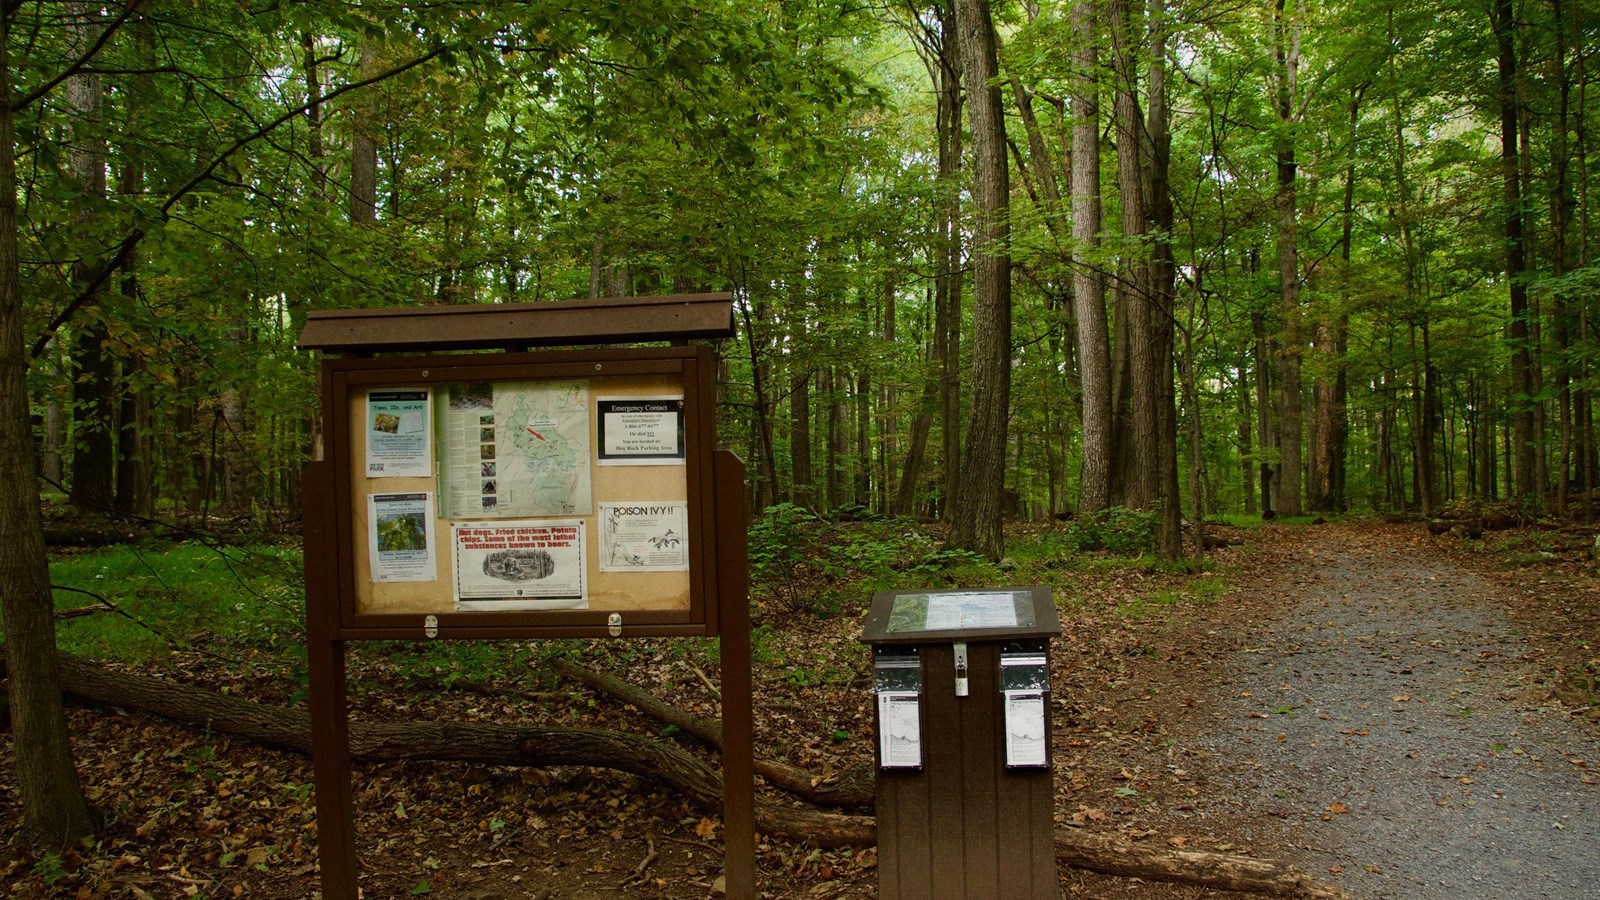 A wooden bulletin board next to a wooden map kiosk alongside a forested trail.